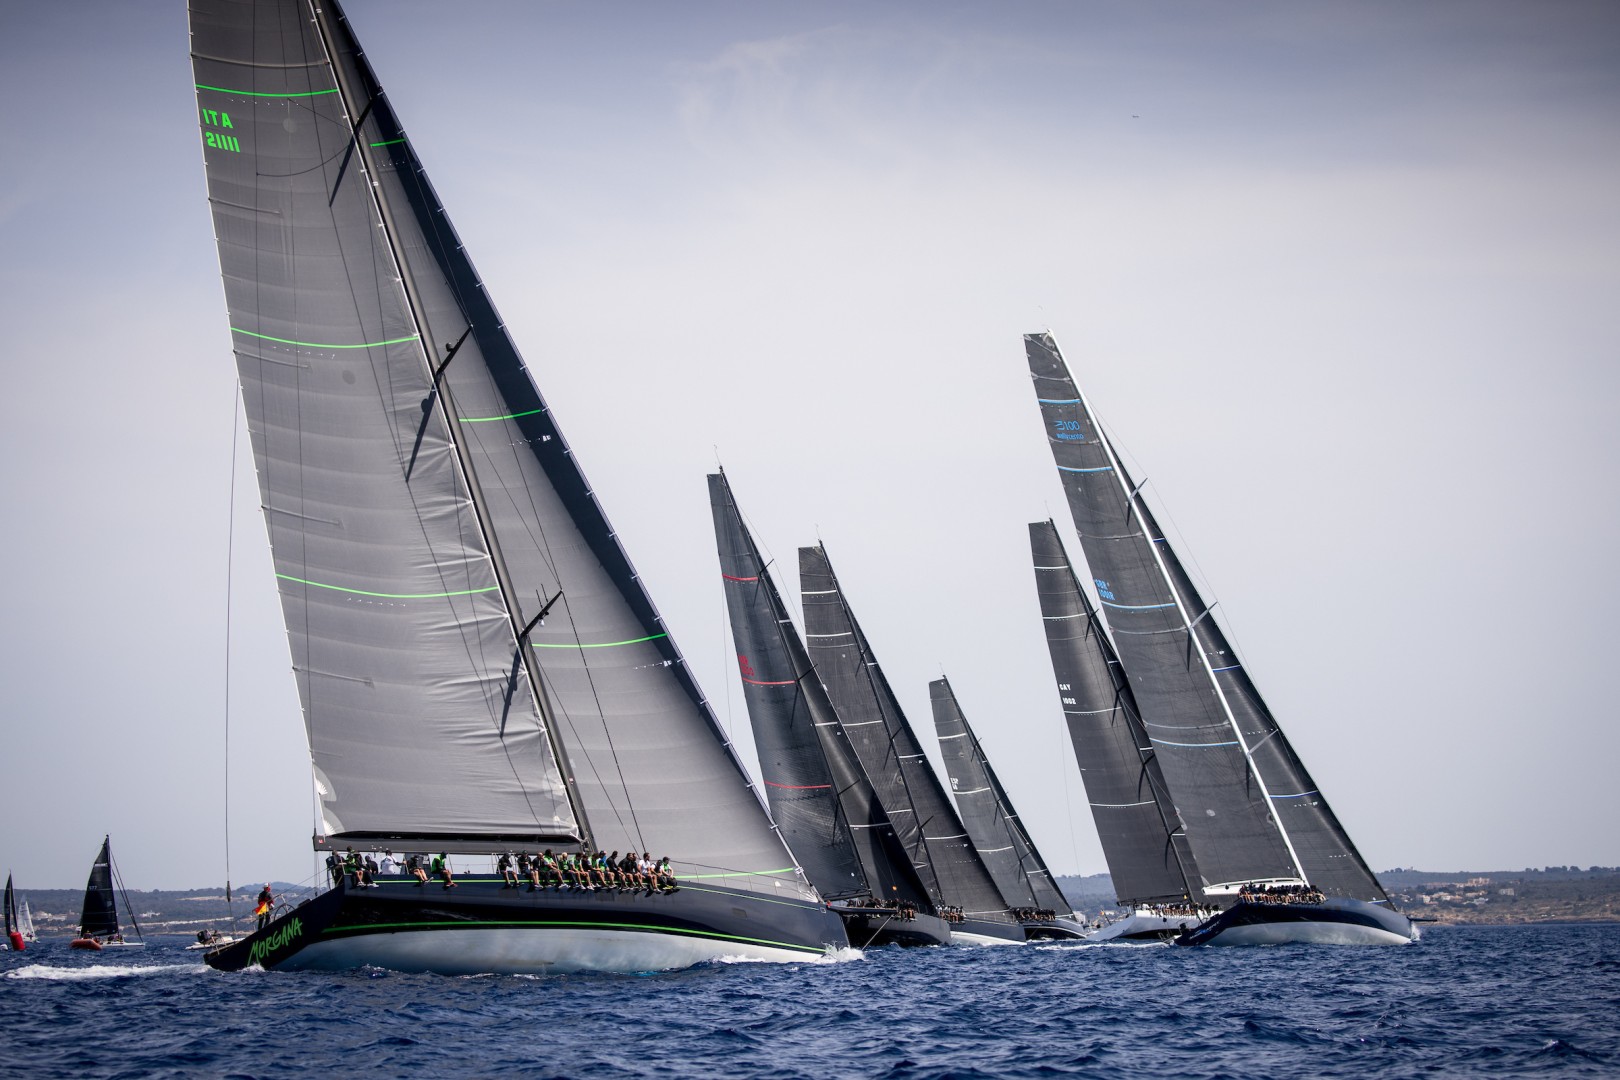 Today's start for the Palmavela Maxis saw Morgana up by the committee boat with Magic Carpet Cubed mid-line. Photo ©SailingShots by Maria Muiña